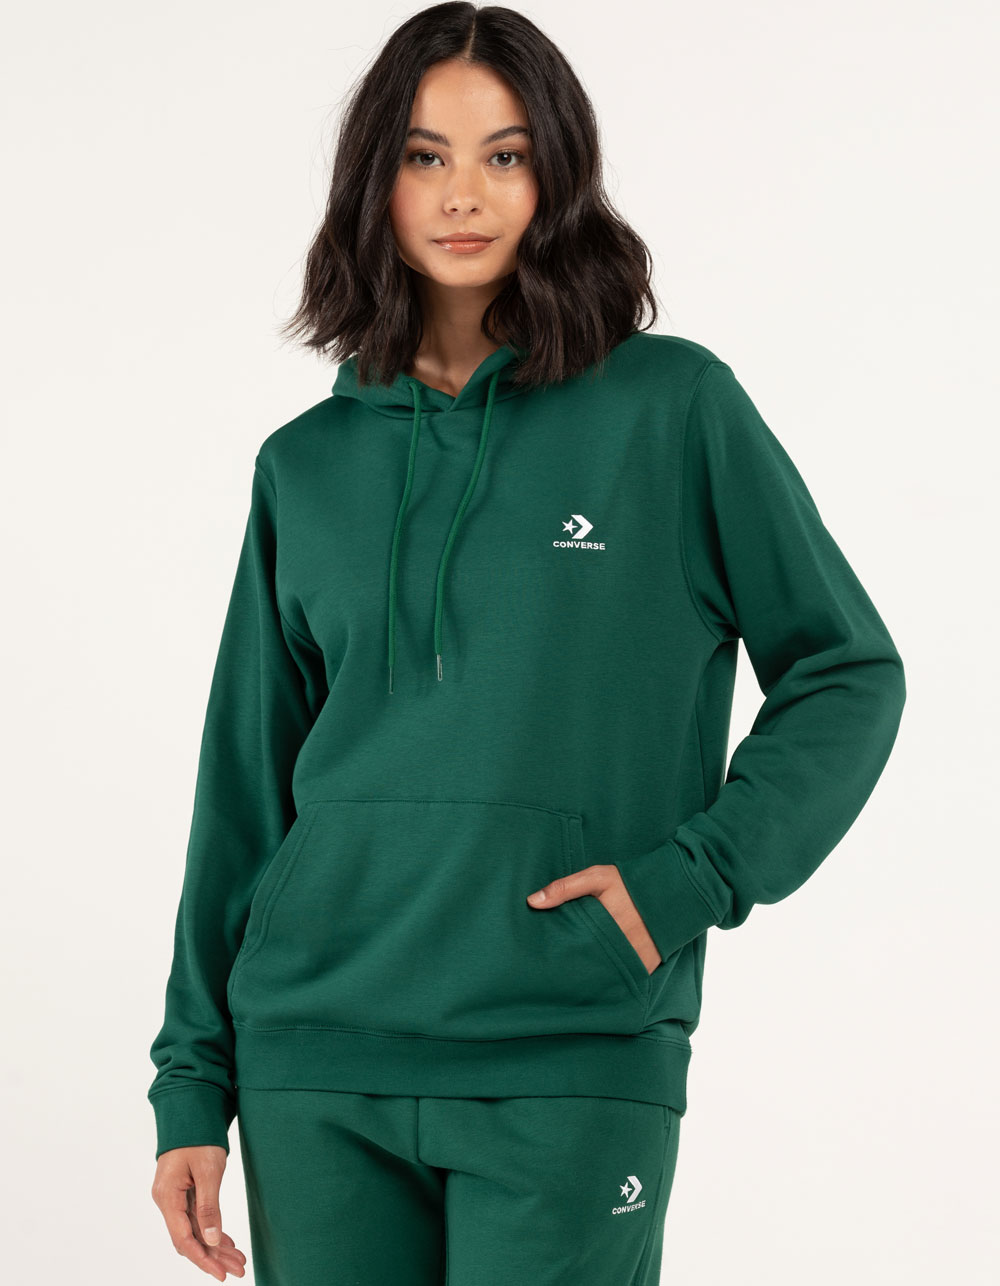 CONVERSE Star Chevron Embroidered Womens Hoodie - CLOVER | Tillys